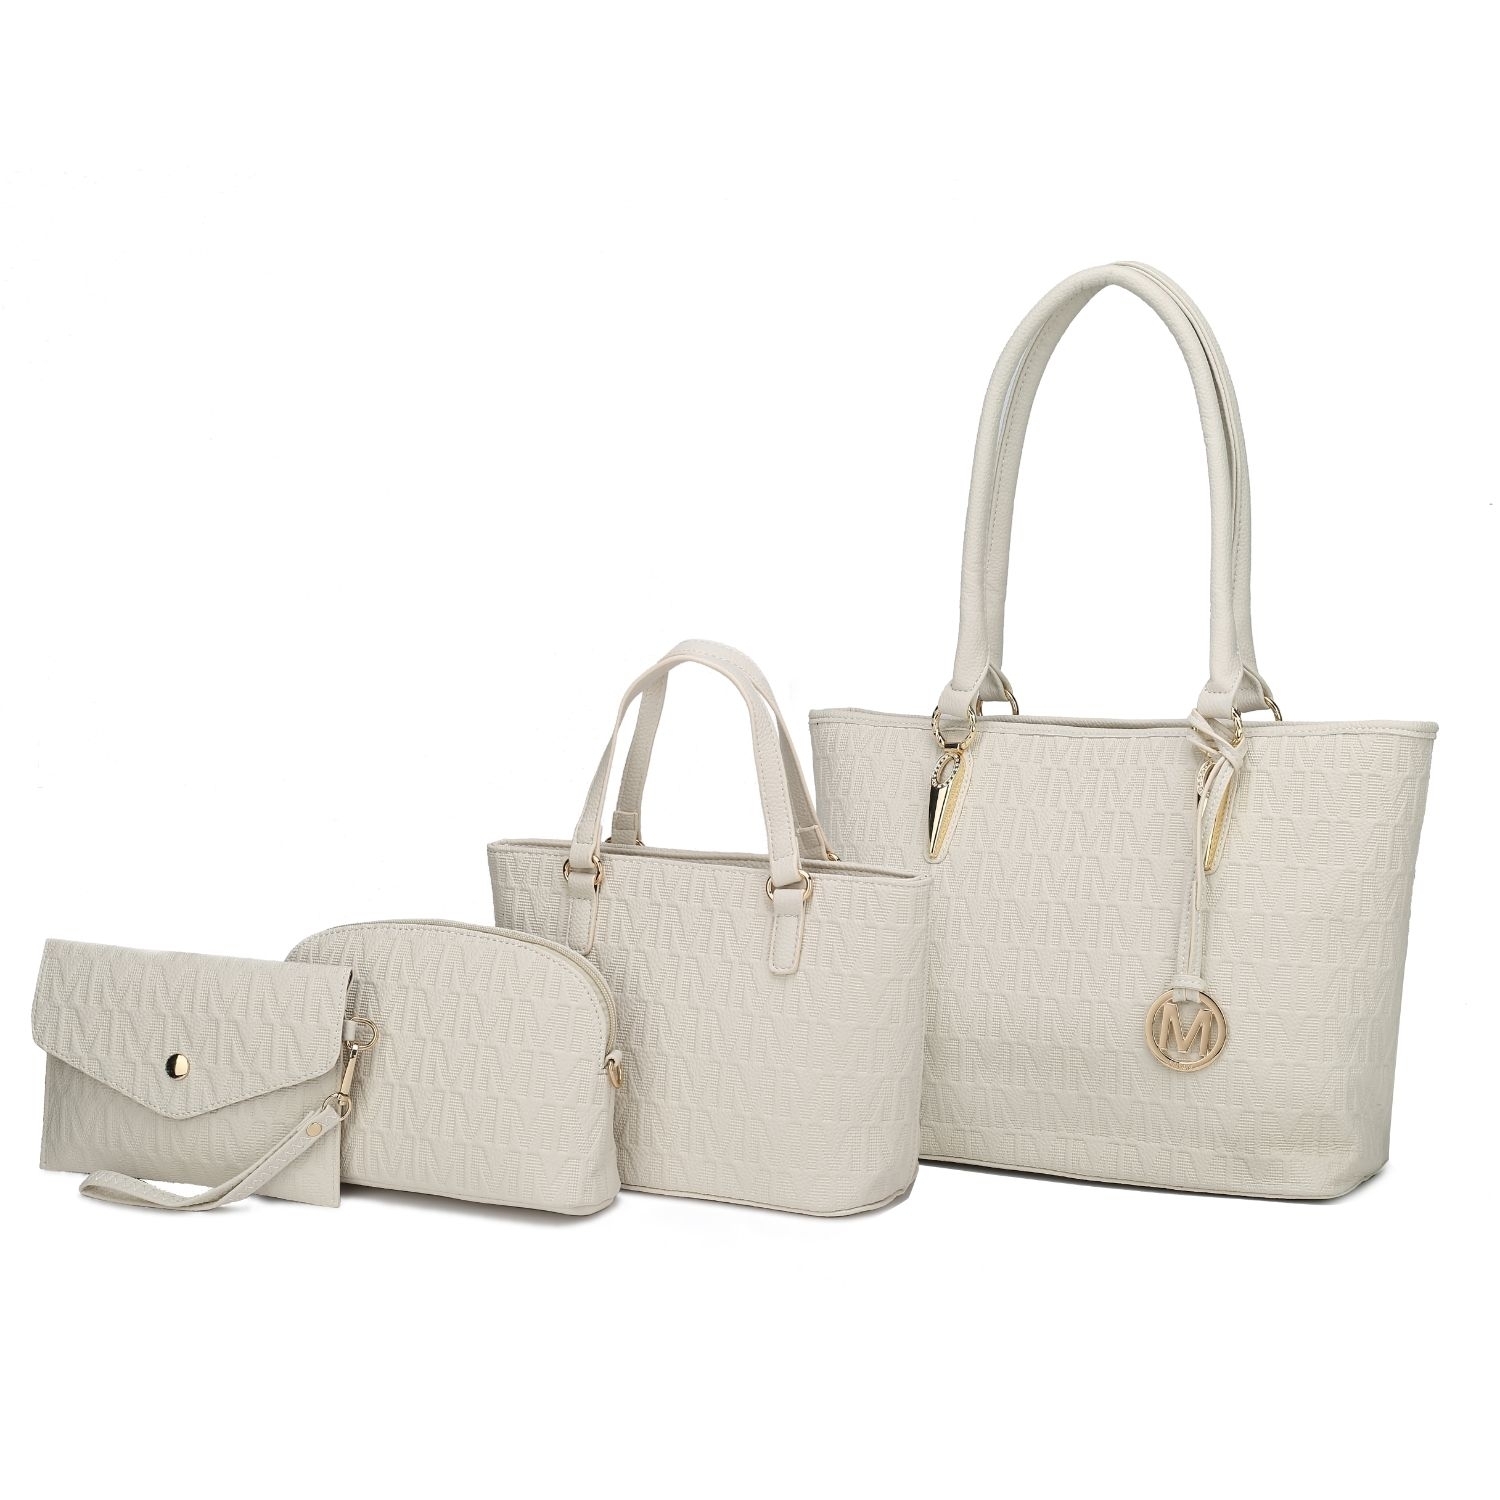 MKF Collection Edelyn Embossed M Signature 4 PCS Tote Handbag Set - Taupe